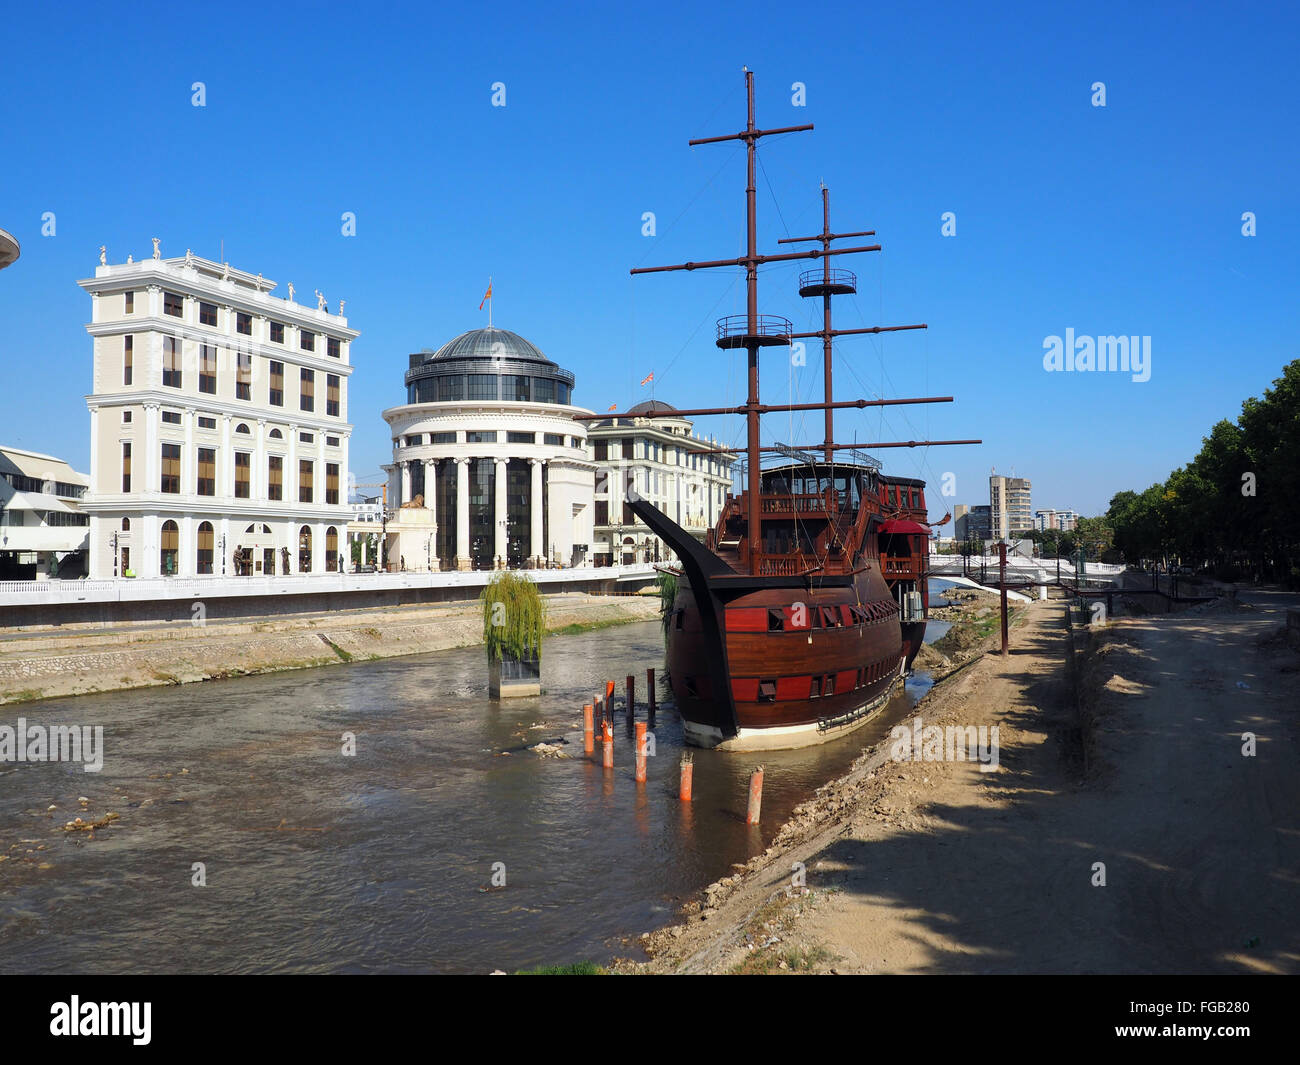 A large wooden sailing ship stranded on the shores of the river Vardar, turned into a restaurant. Stock Photo